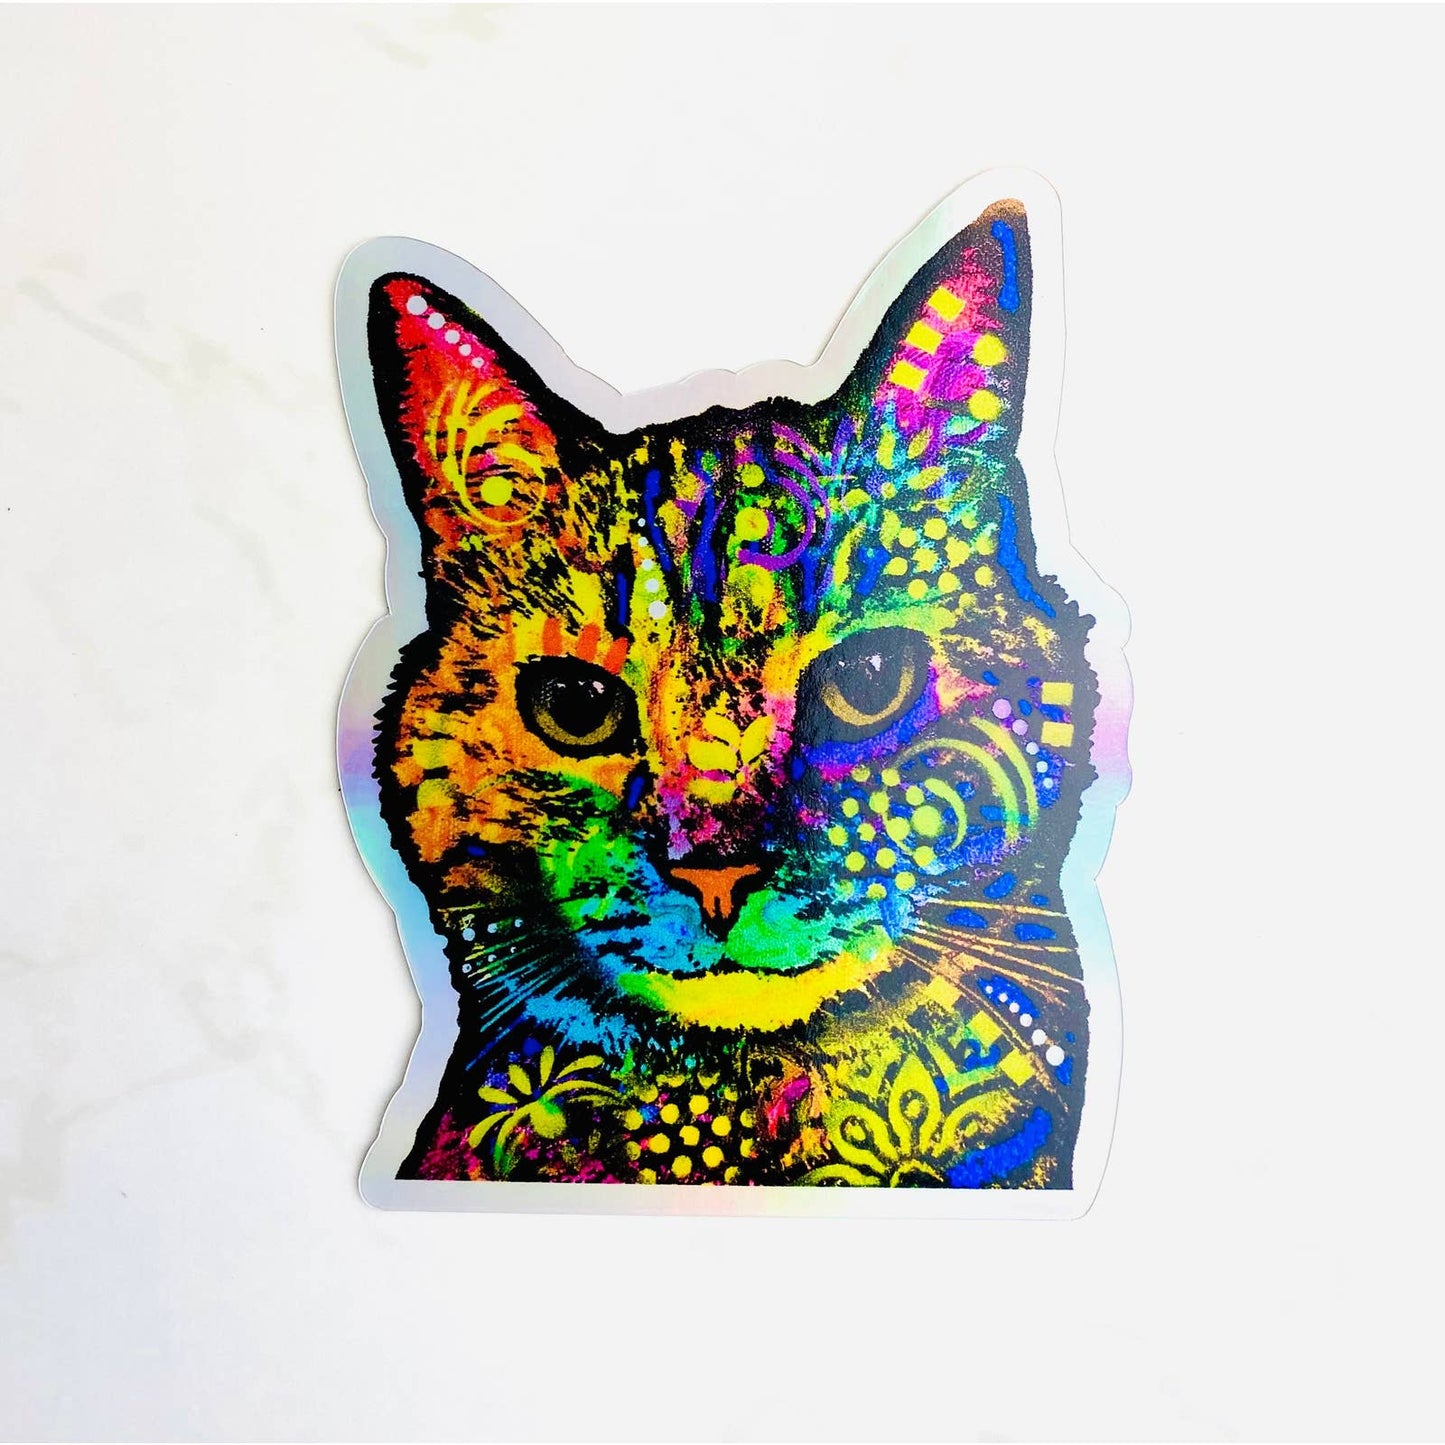 Dean Russo Holographic Cat Stickers